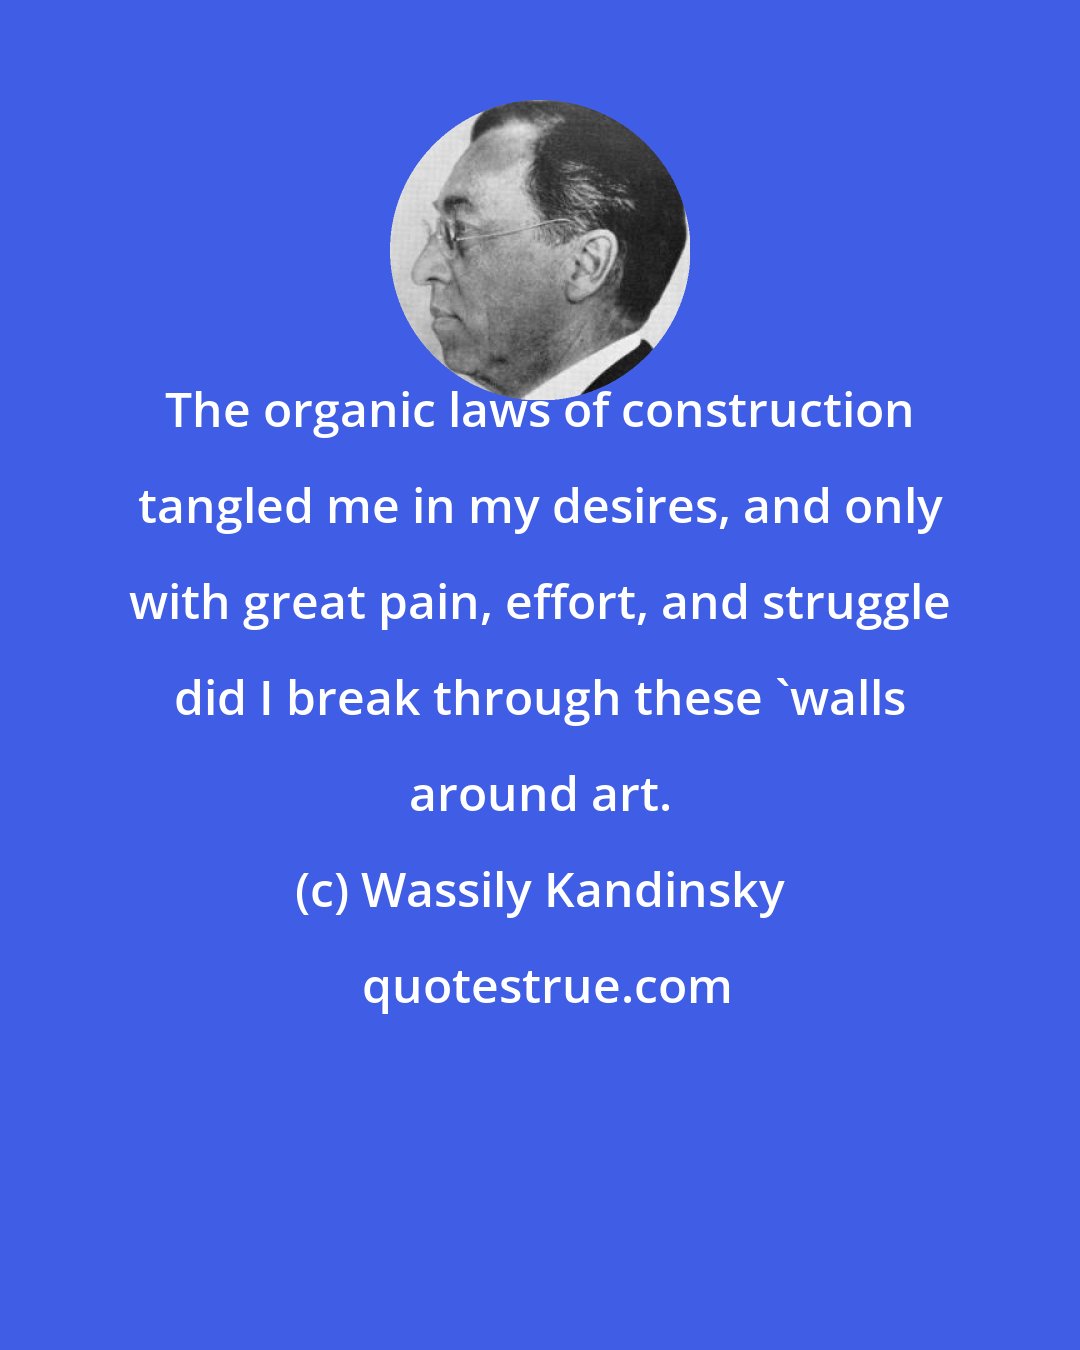 Wassily Kandinsky: The organic laws of construction tangled me in my desires, and only with great pain, effort, and struggle did I break through these 'walls around art.